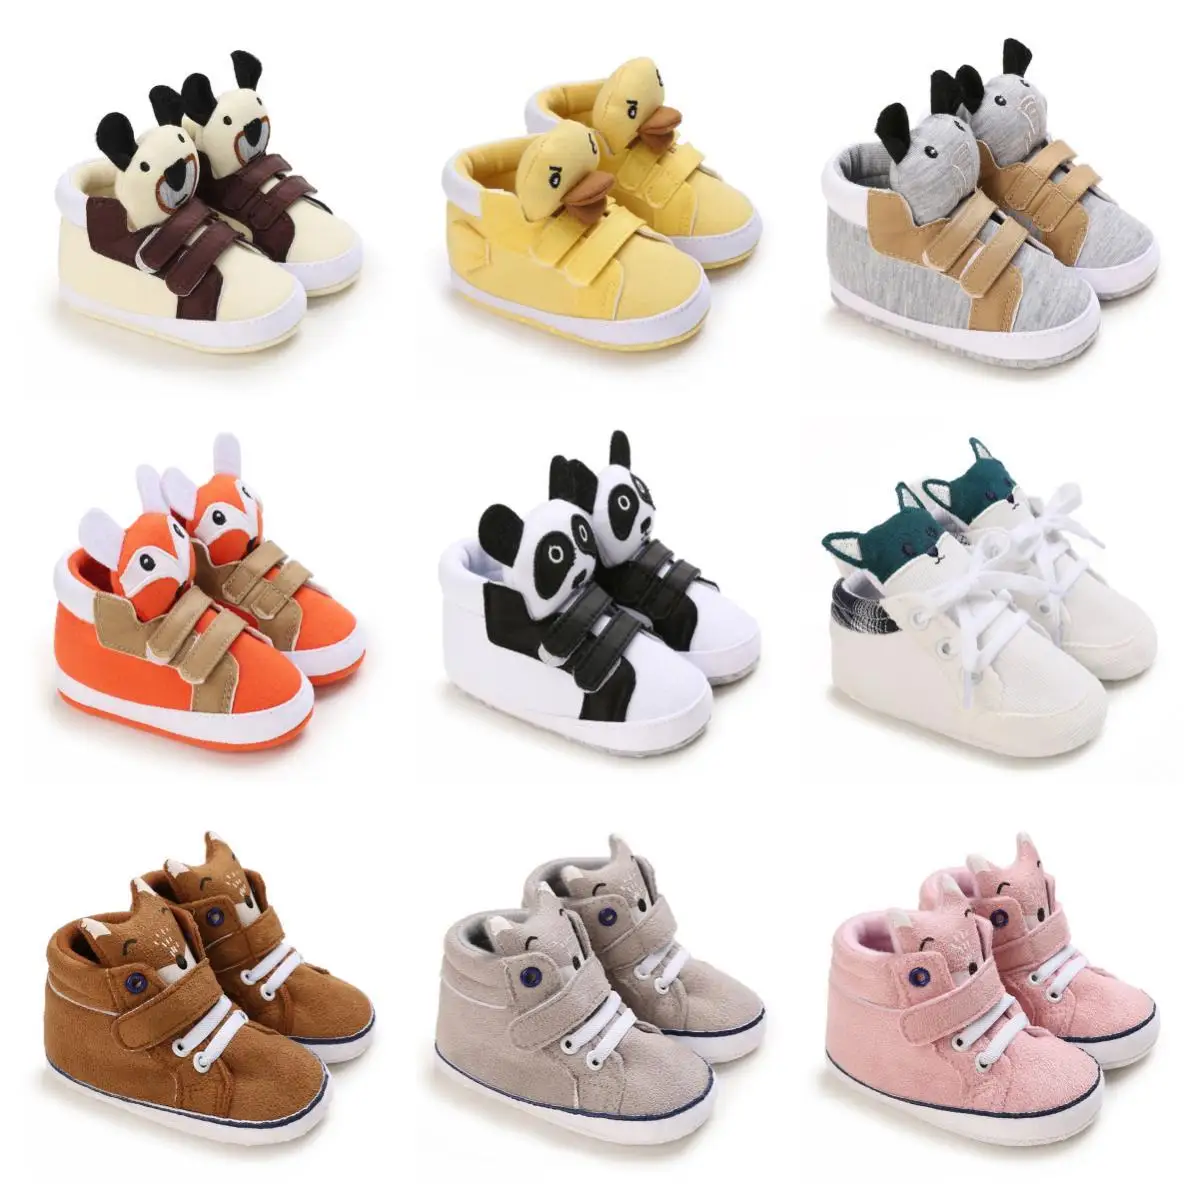 newborn baby socks shoes boy girl baby cute animal face toddler shoes first toddler ankle boots cotton non slip warm baby shoes Classic Baby Shoe Boy Girl Baby Cute Animal Face Casual Flat Sneaker First Baby Ankle Boot Cotton Non-slip Warm Walking Shoes